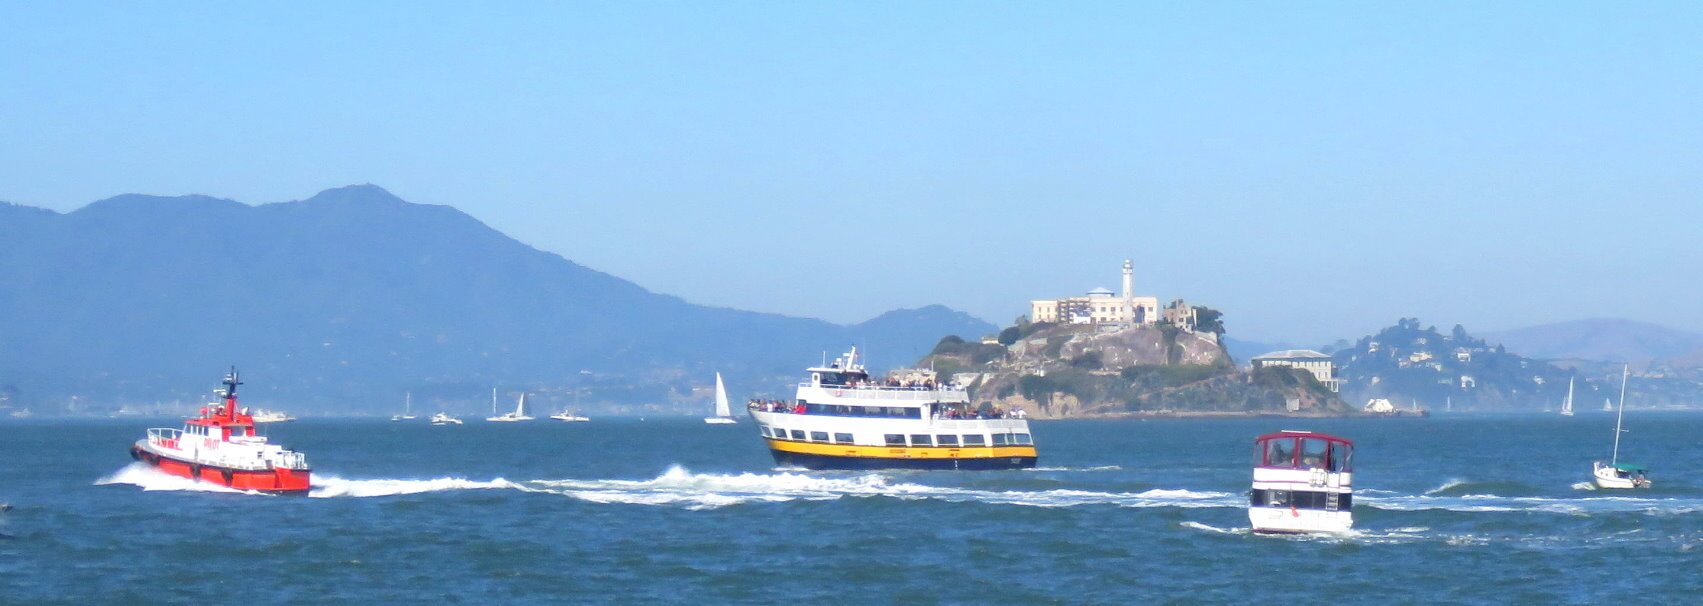 sf_city_guided_tour_and_bay_cruise_ferry_trip_in_the_san_francisco_bay